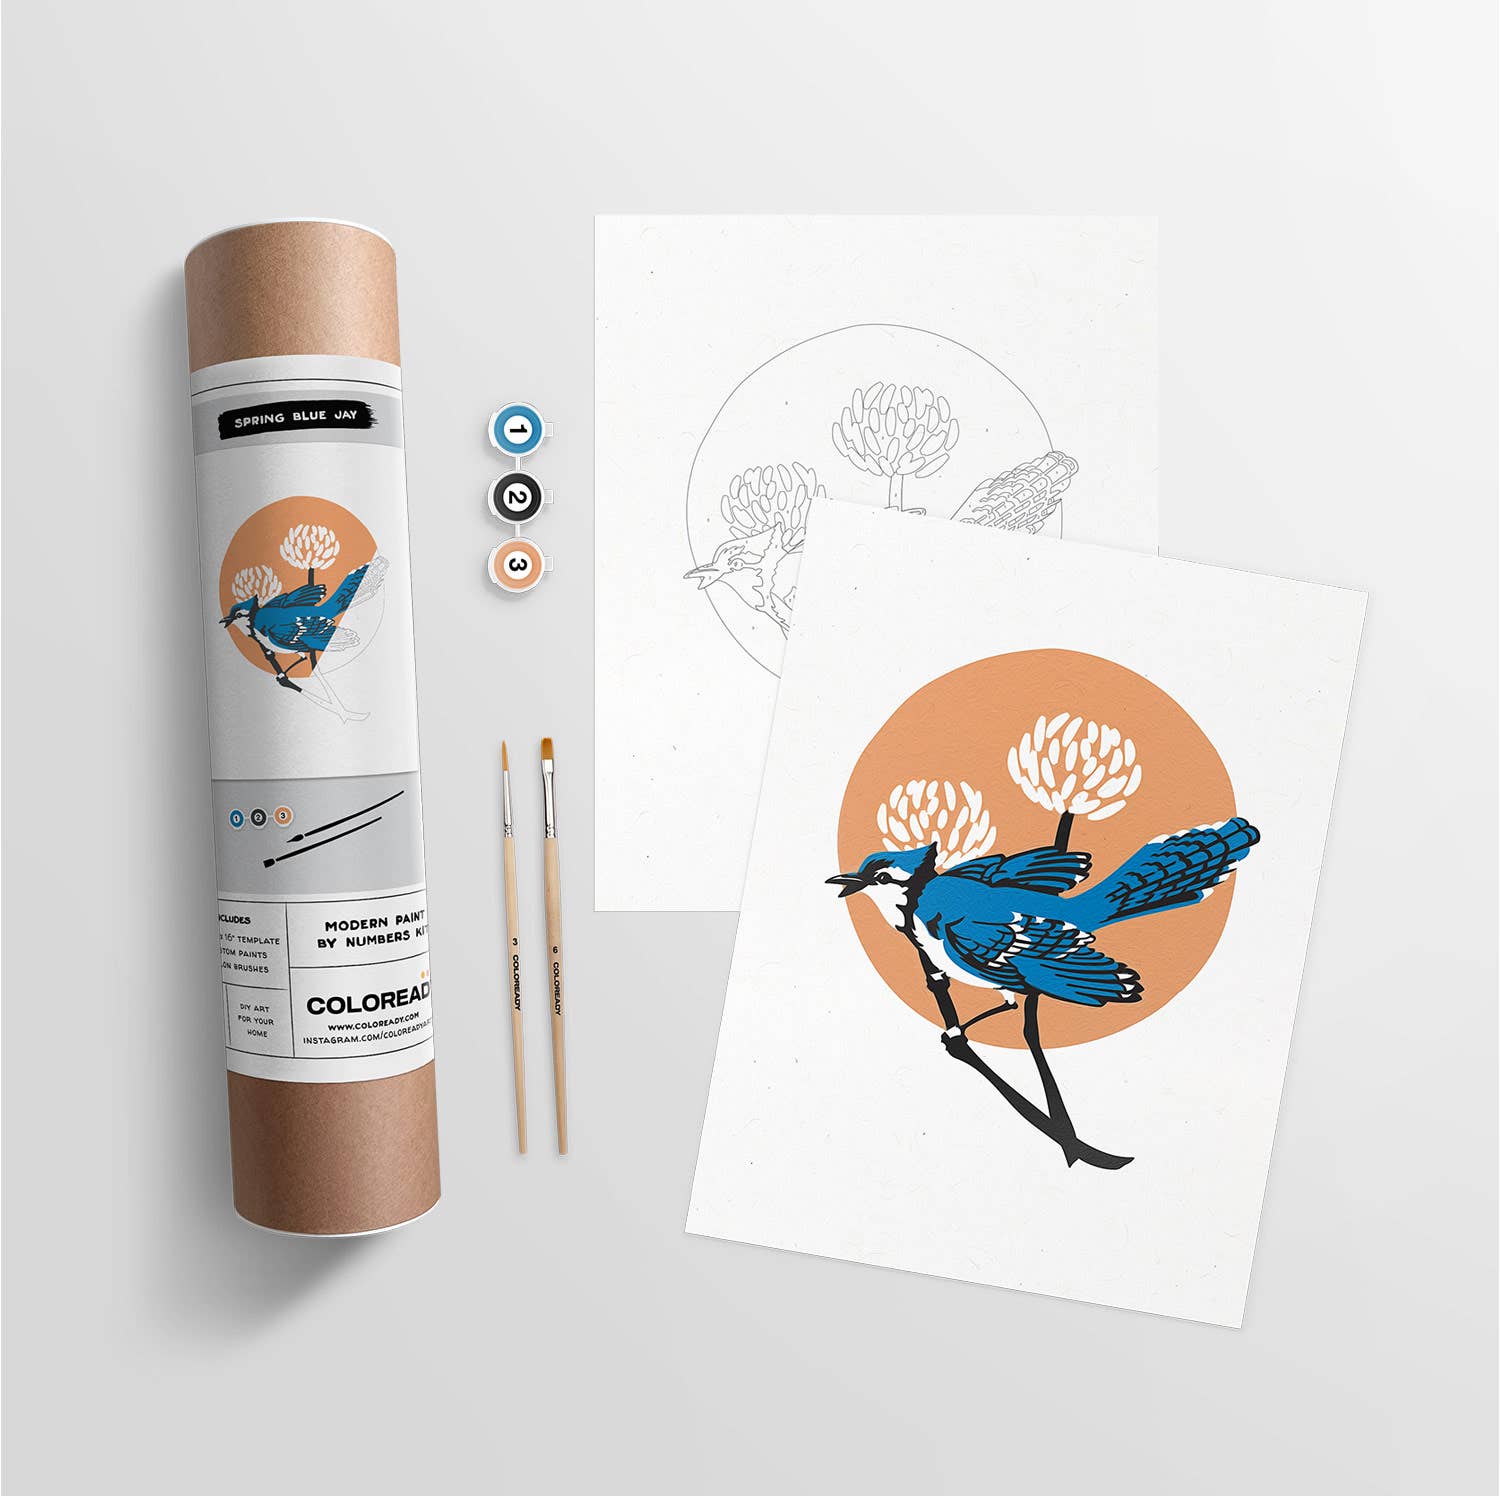 Spring Blue Jay | Modern Paint By Numbers Kit